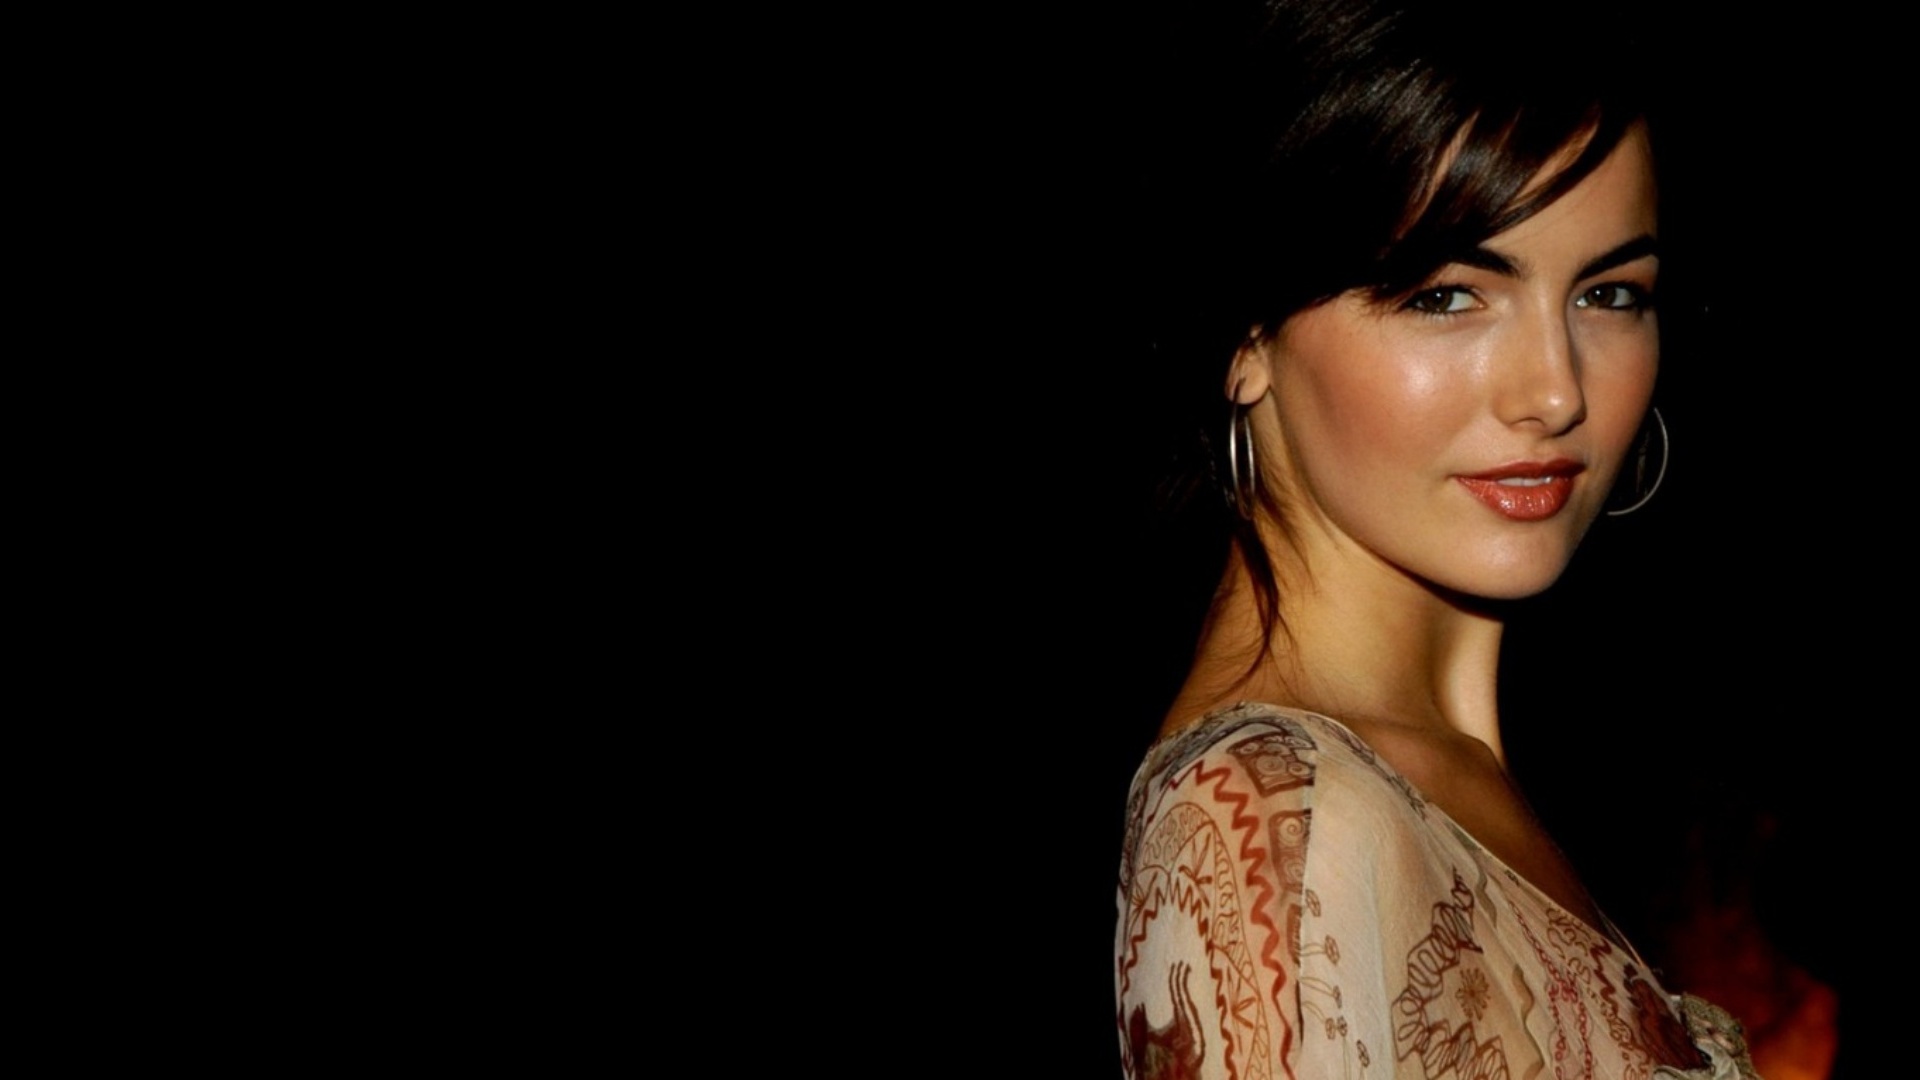 Camilla Belle Beautiful Wallpapers